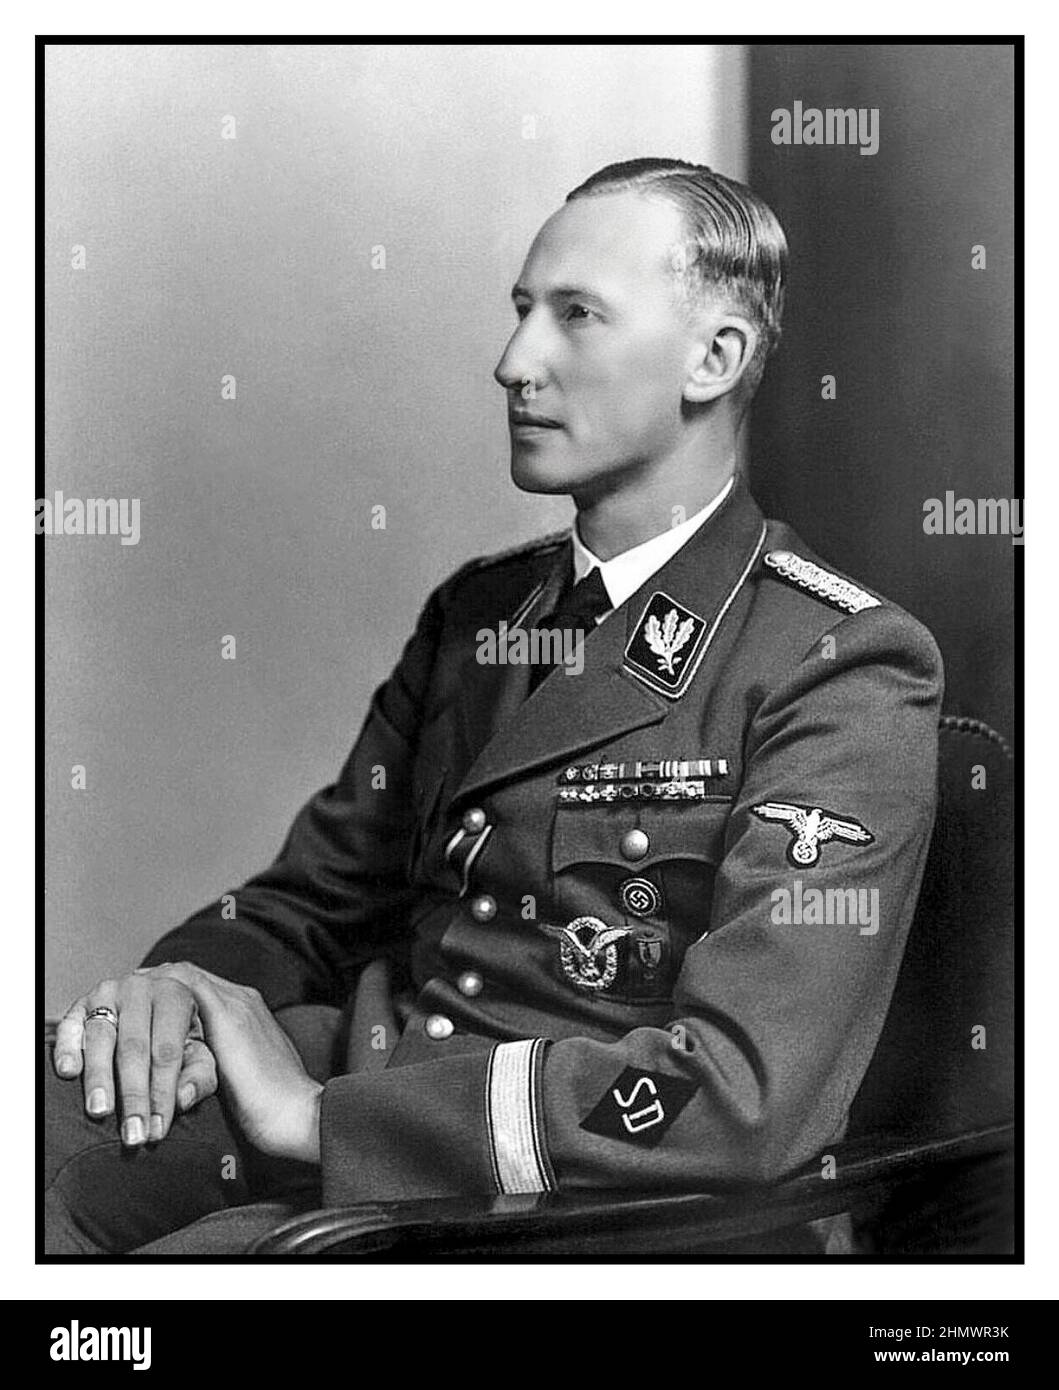 1940 HEYDRICH WAFFEN SS NAZI Reinhard Tristan Eugen Heydrich was a high-ranking (particularly odious) German Nazi official during World War II, and a main architect of the Holocaust. He was an SS-Obergruppenführer und General der Polizei as well as chief of the Reich Main Security Office. Assassinated by bold courageous Czech Resistance fighters 4 June 1942, Prague, Czech Republic Stock Photo